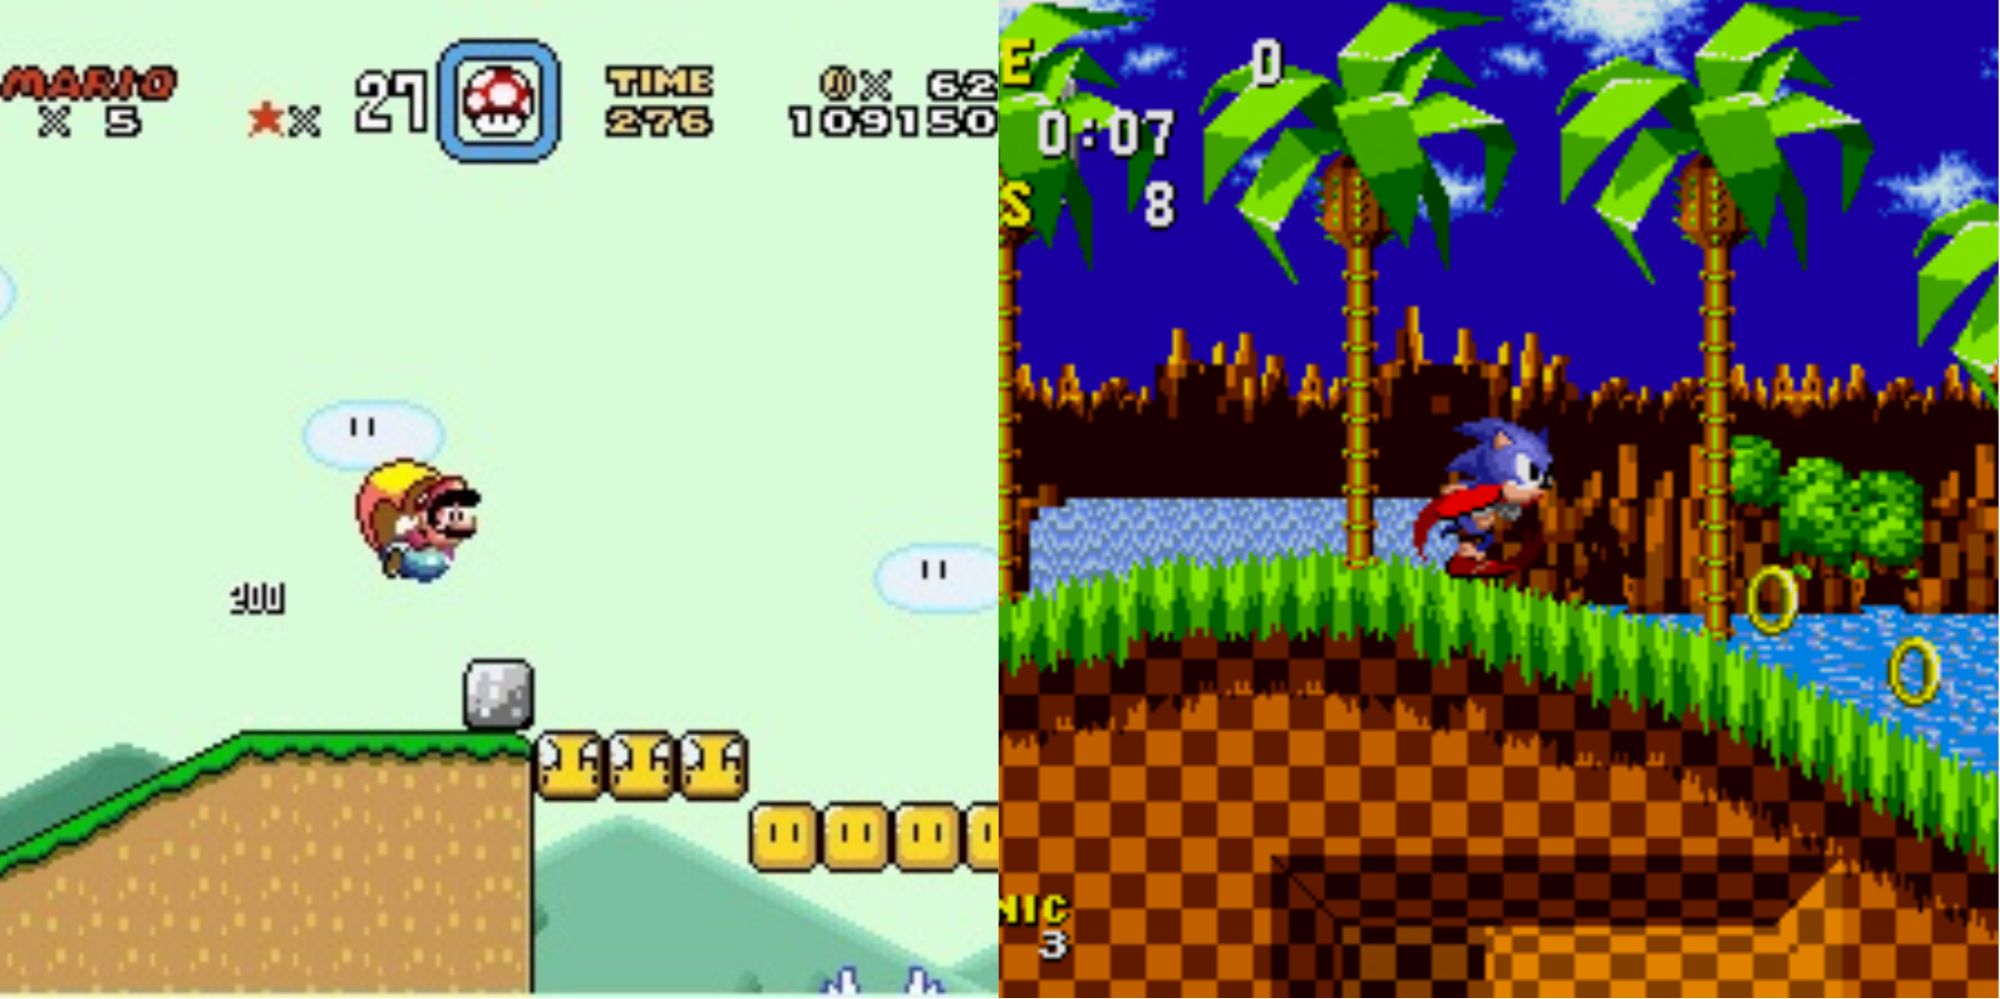 Flagship games on their respective consoles, Mario (here in Donut Plains 4) and Sonic (in Green Hill Zone 1) faced off for a decade.